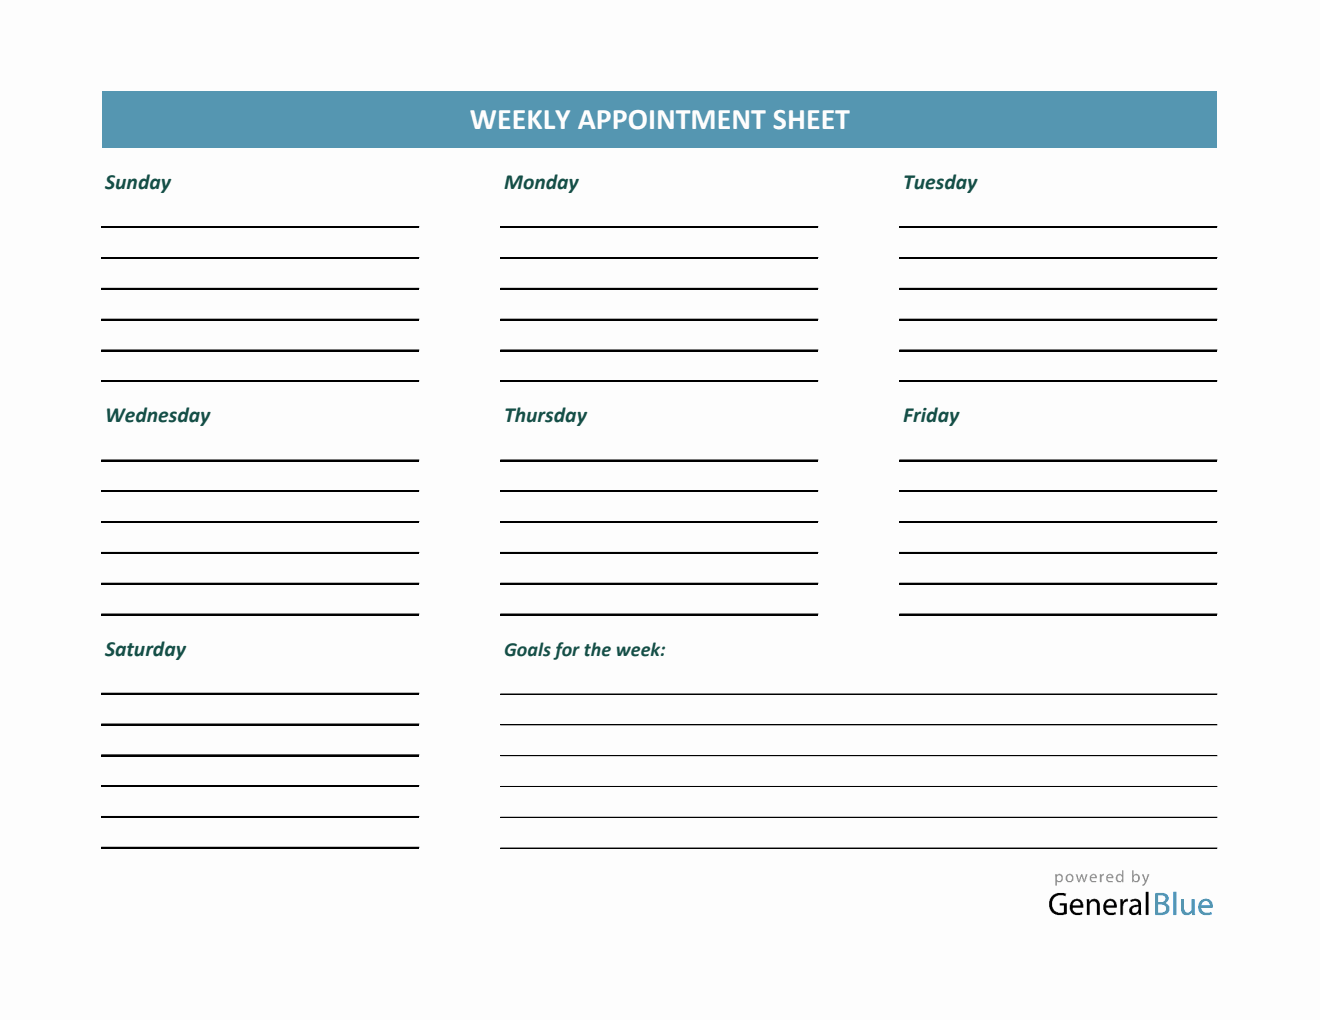 Weekly Appointment Sheet Template in Excel (Basic)